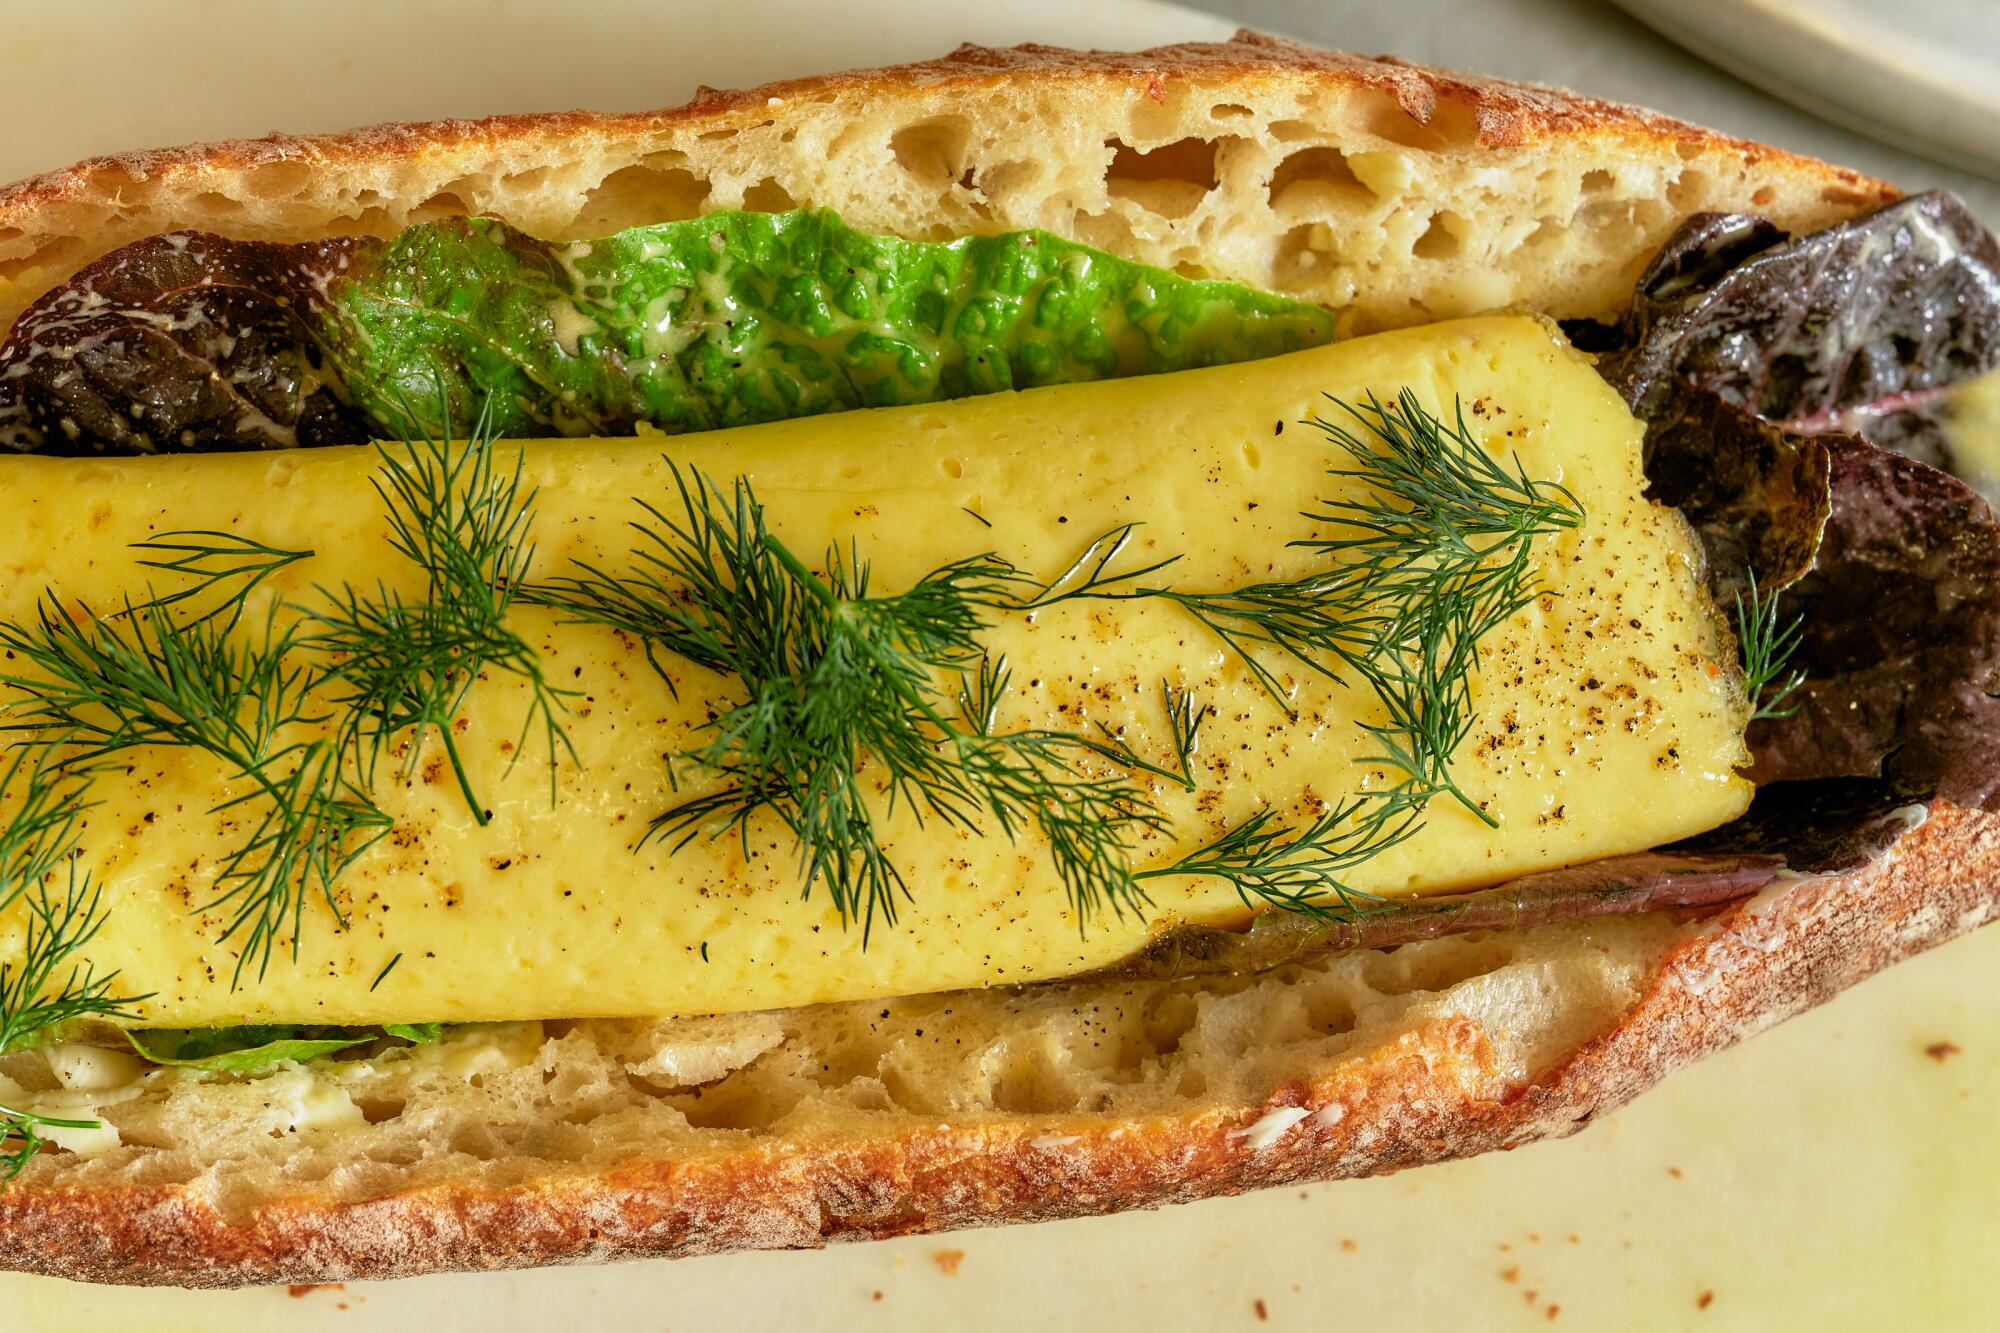 A split baguette holds an omelet sprinkled with dill